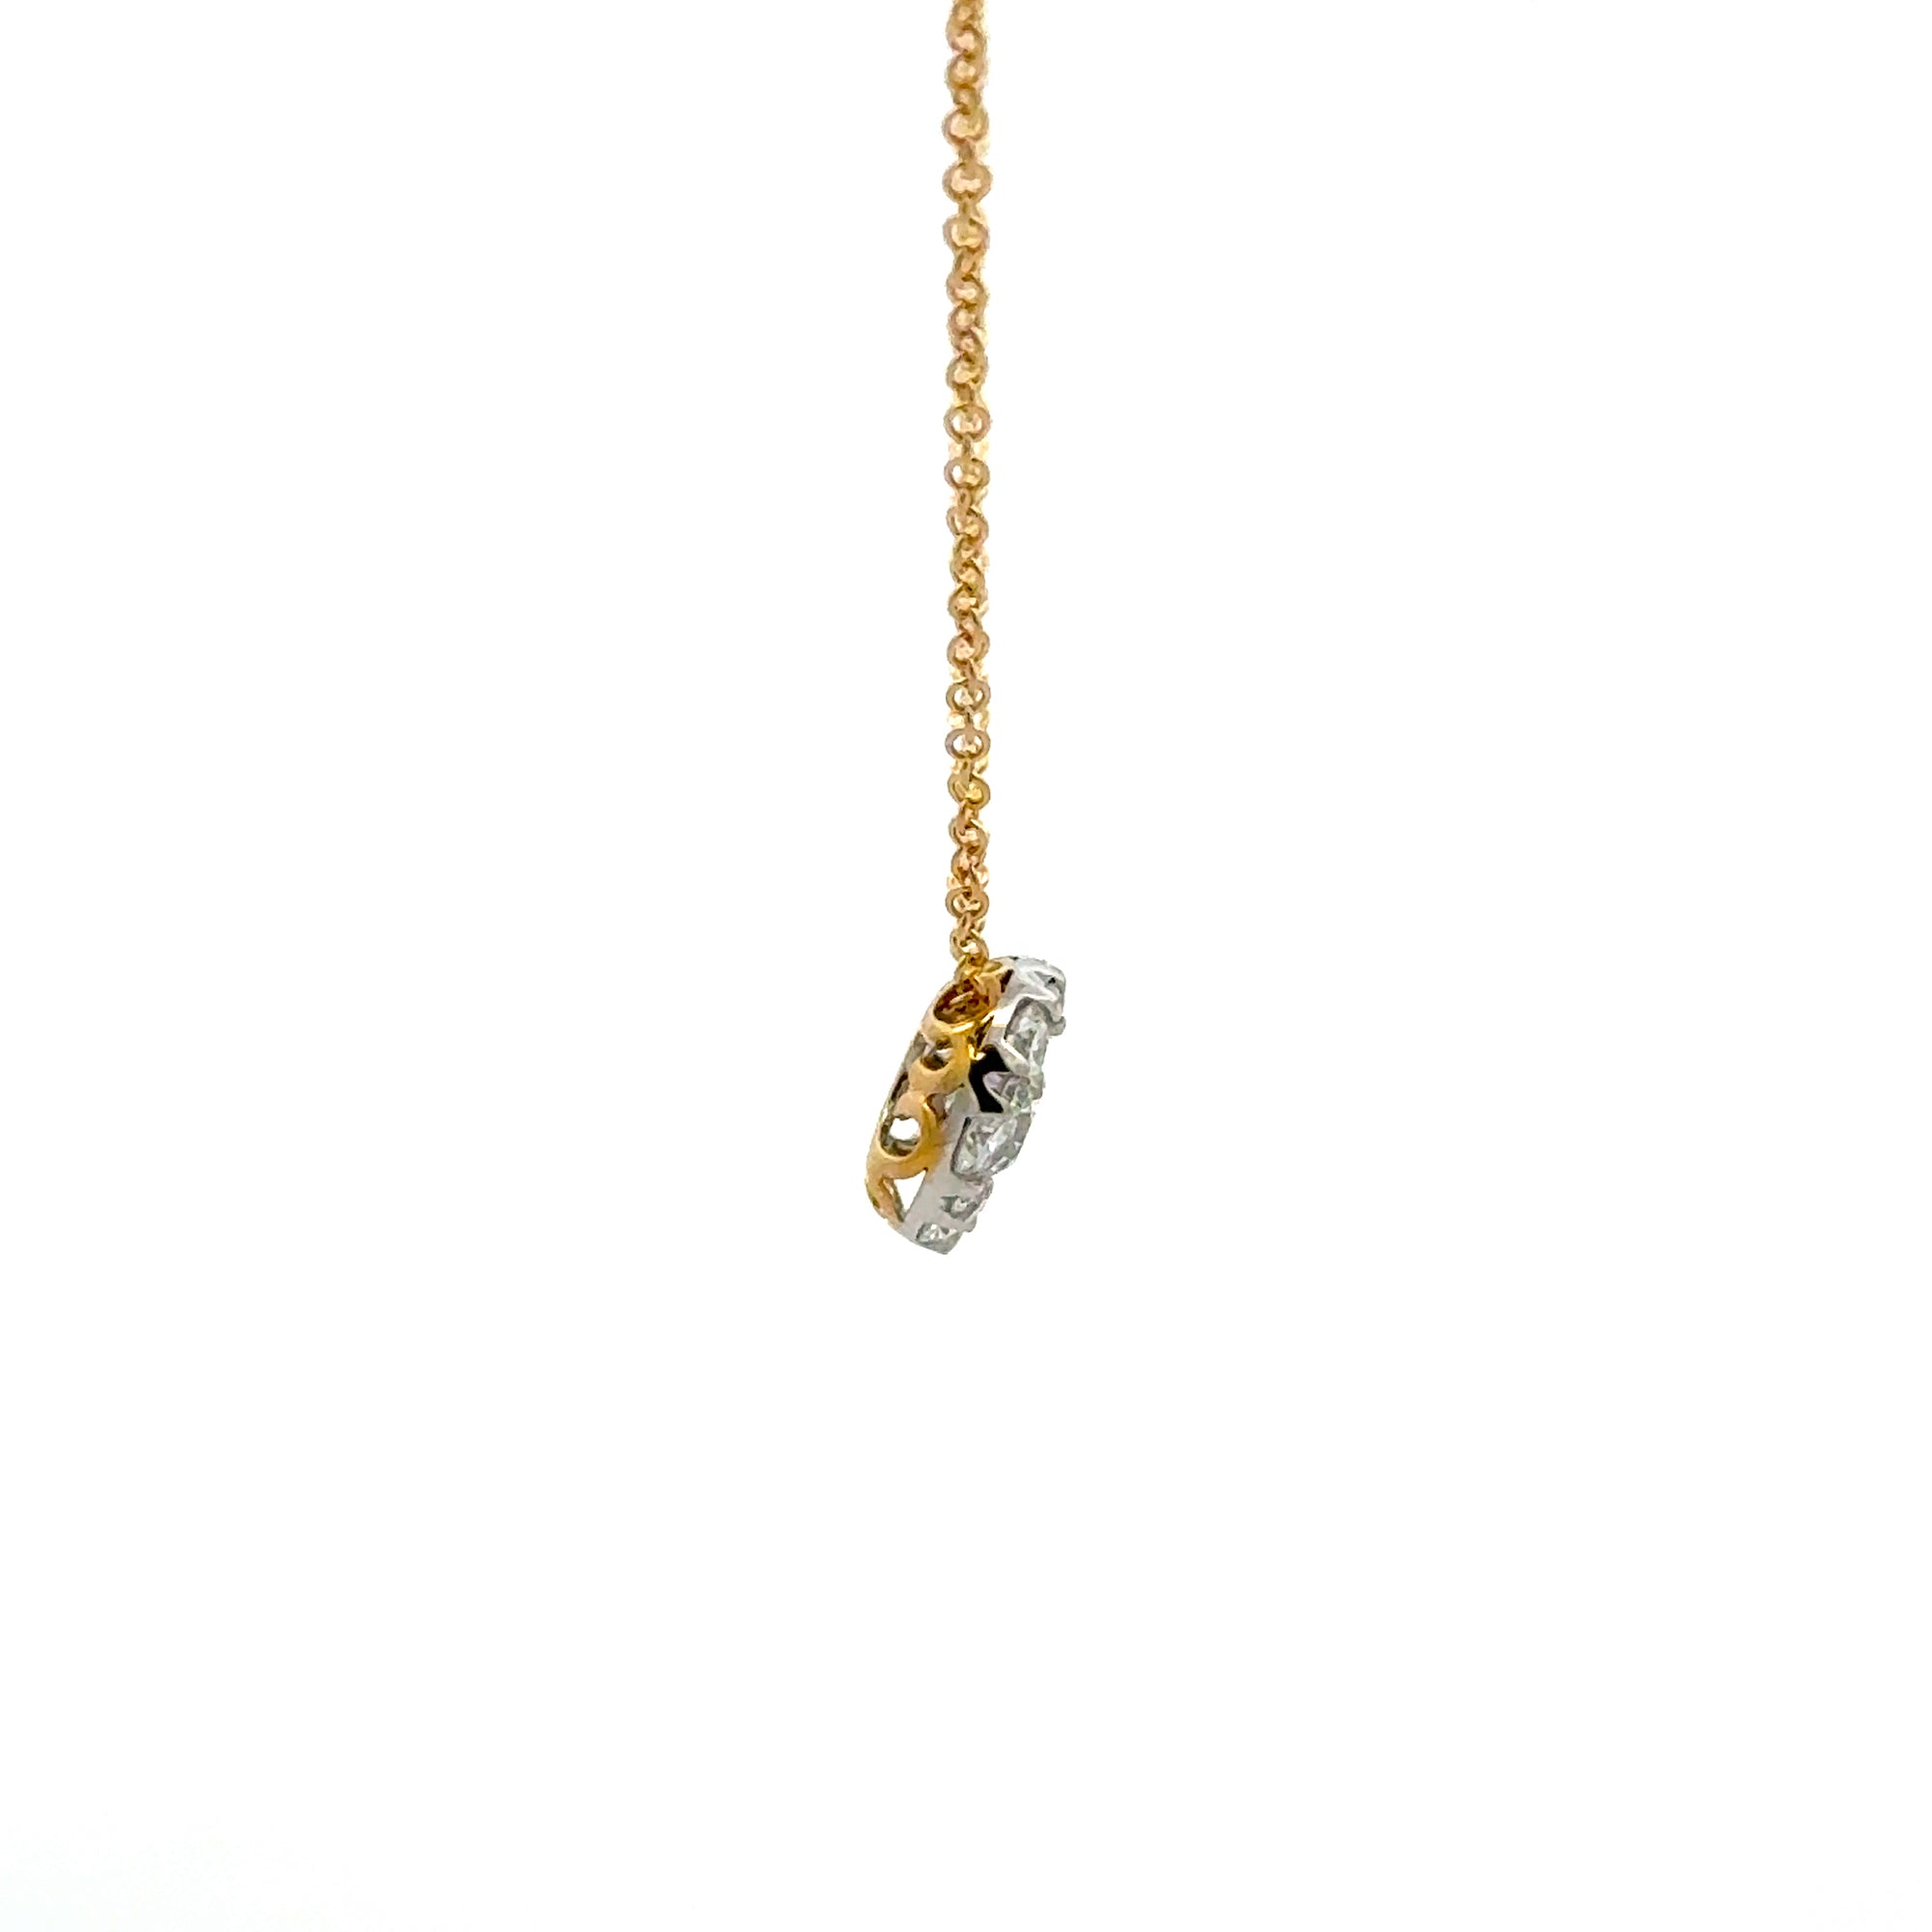 A. Jaffe 14K Yellow Gold 0.68cttw. Diamond Cluster Necklace